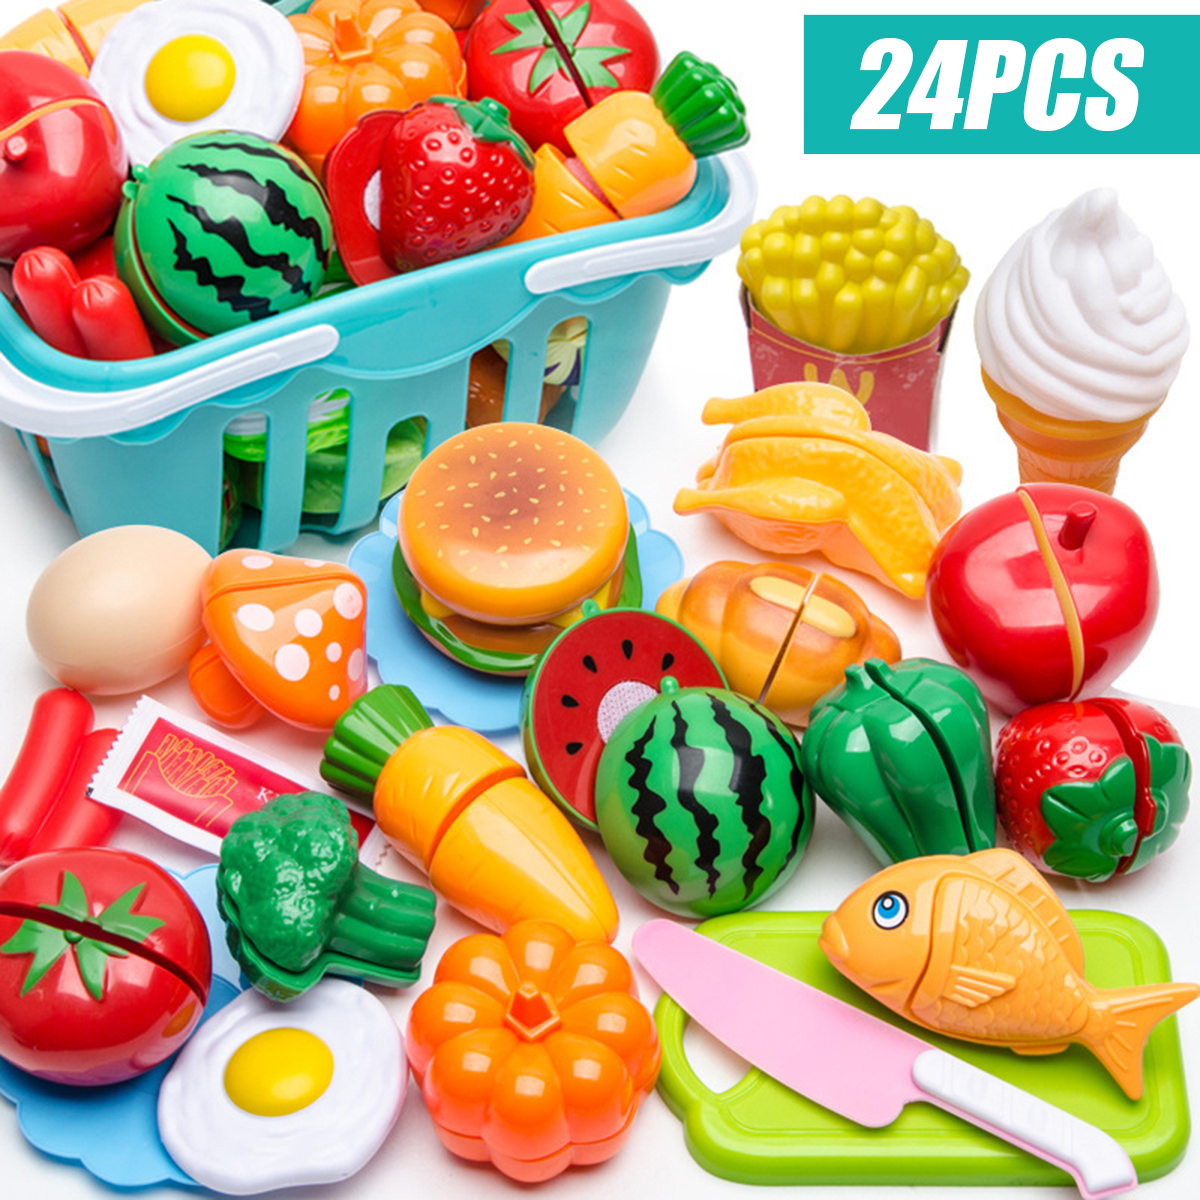 24Pcs Fruits Vegetable Food Toy Child Kids Pretend Role Play Plastic Cutting Set 